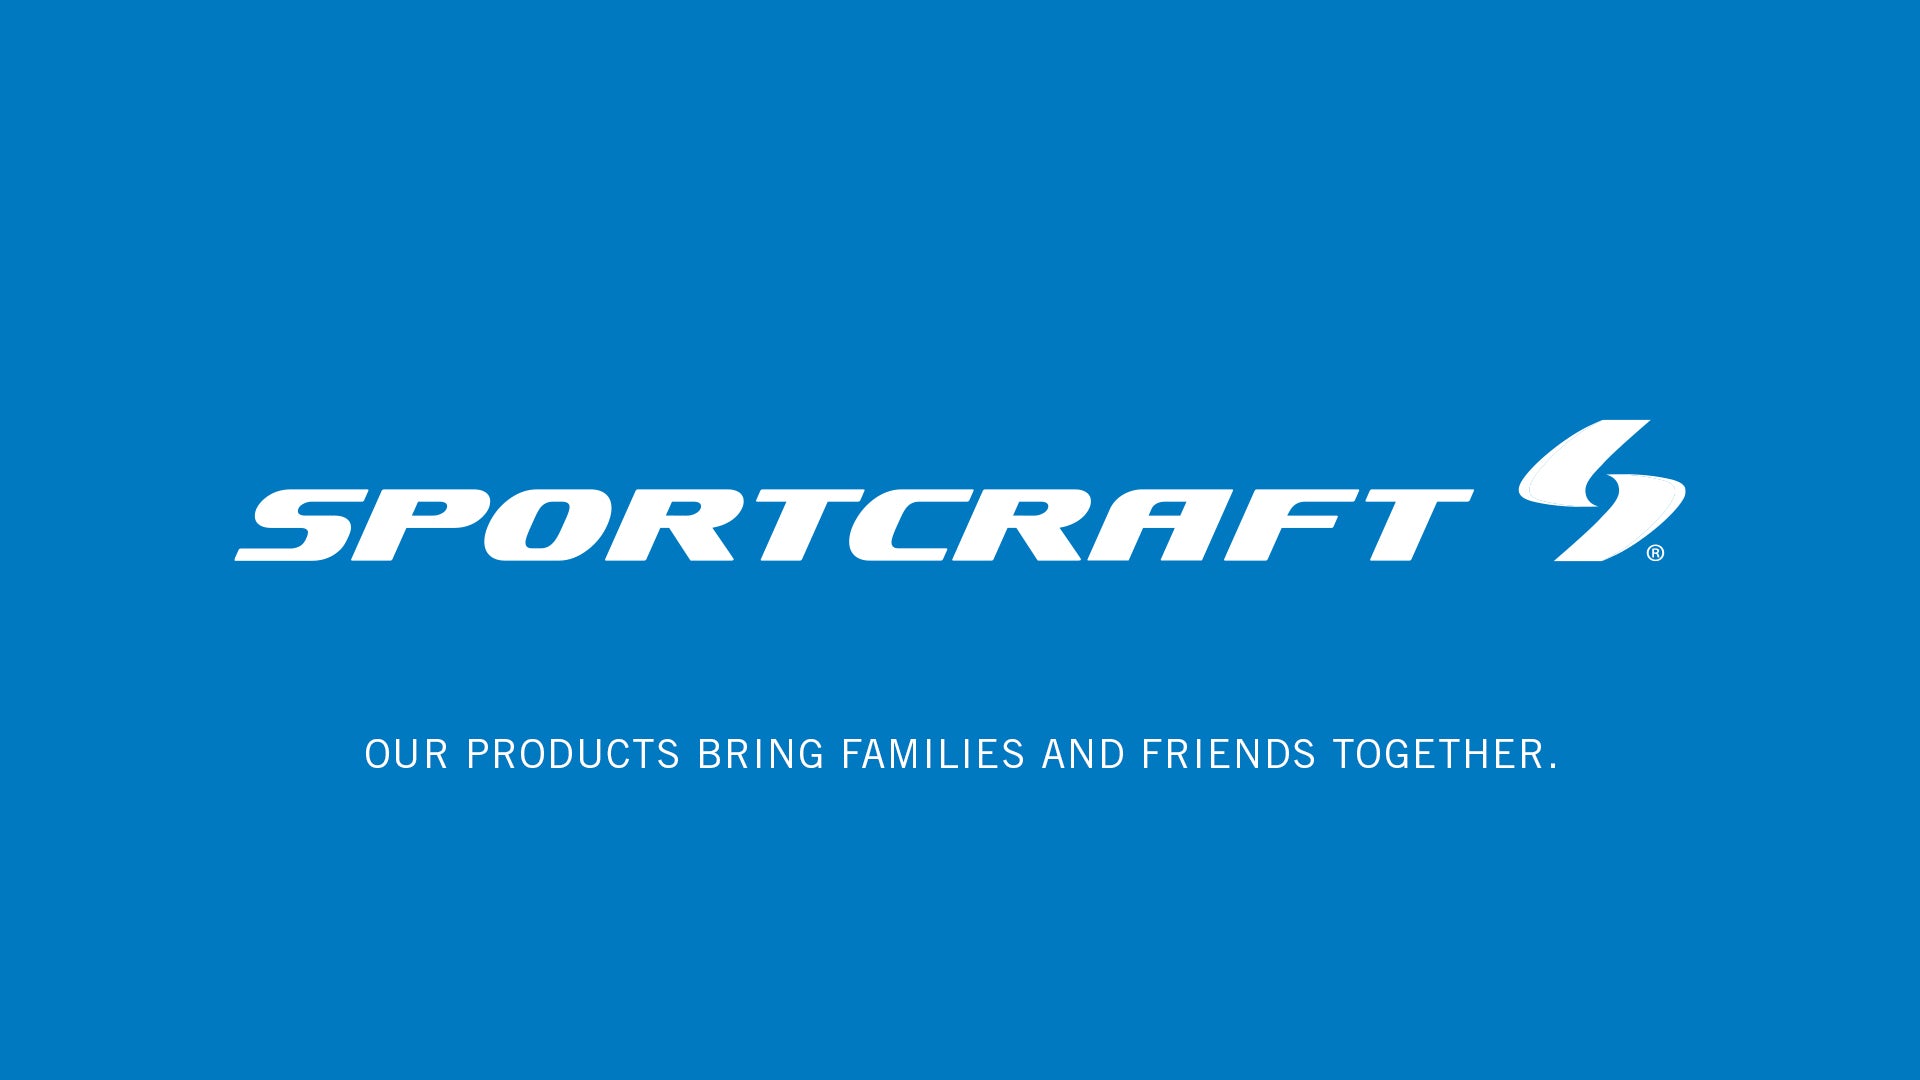 Load video: Sportcraft product video, showing people play with various outdoor games.  Our products bring families and friends together.